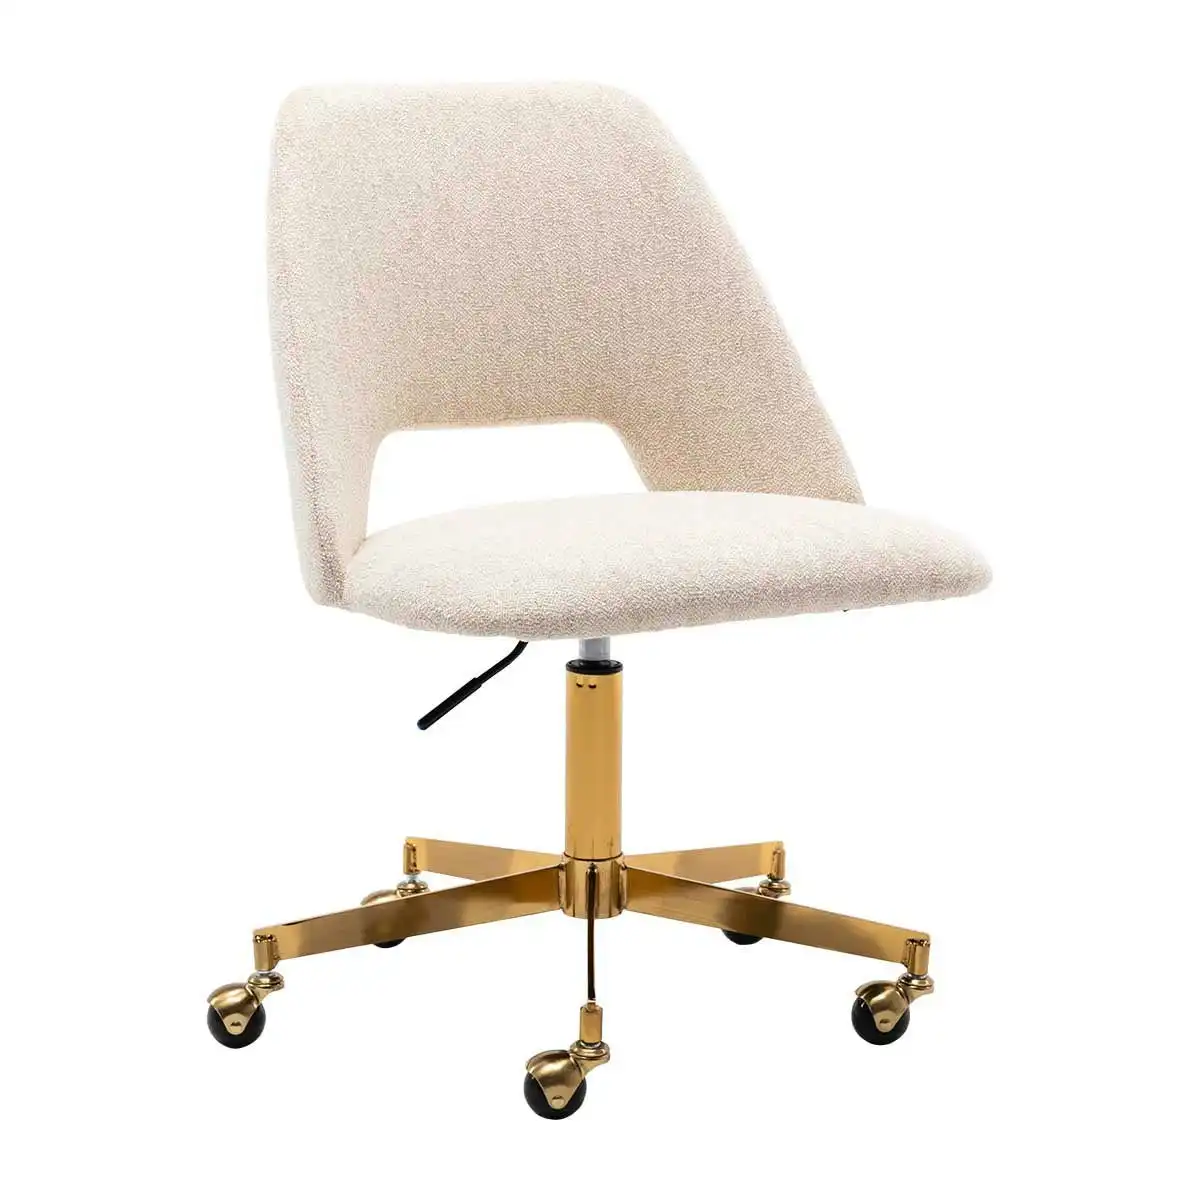 Belmont Fabric Office Chair (Brushed Gold, Cream)